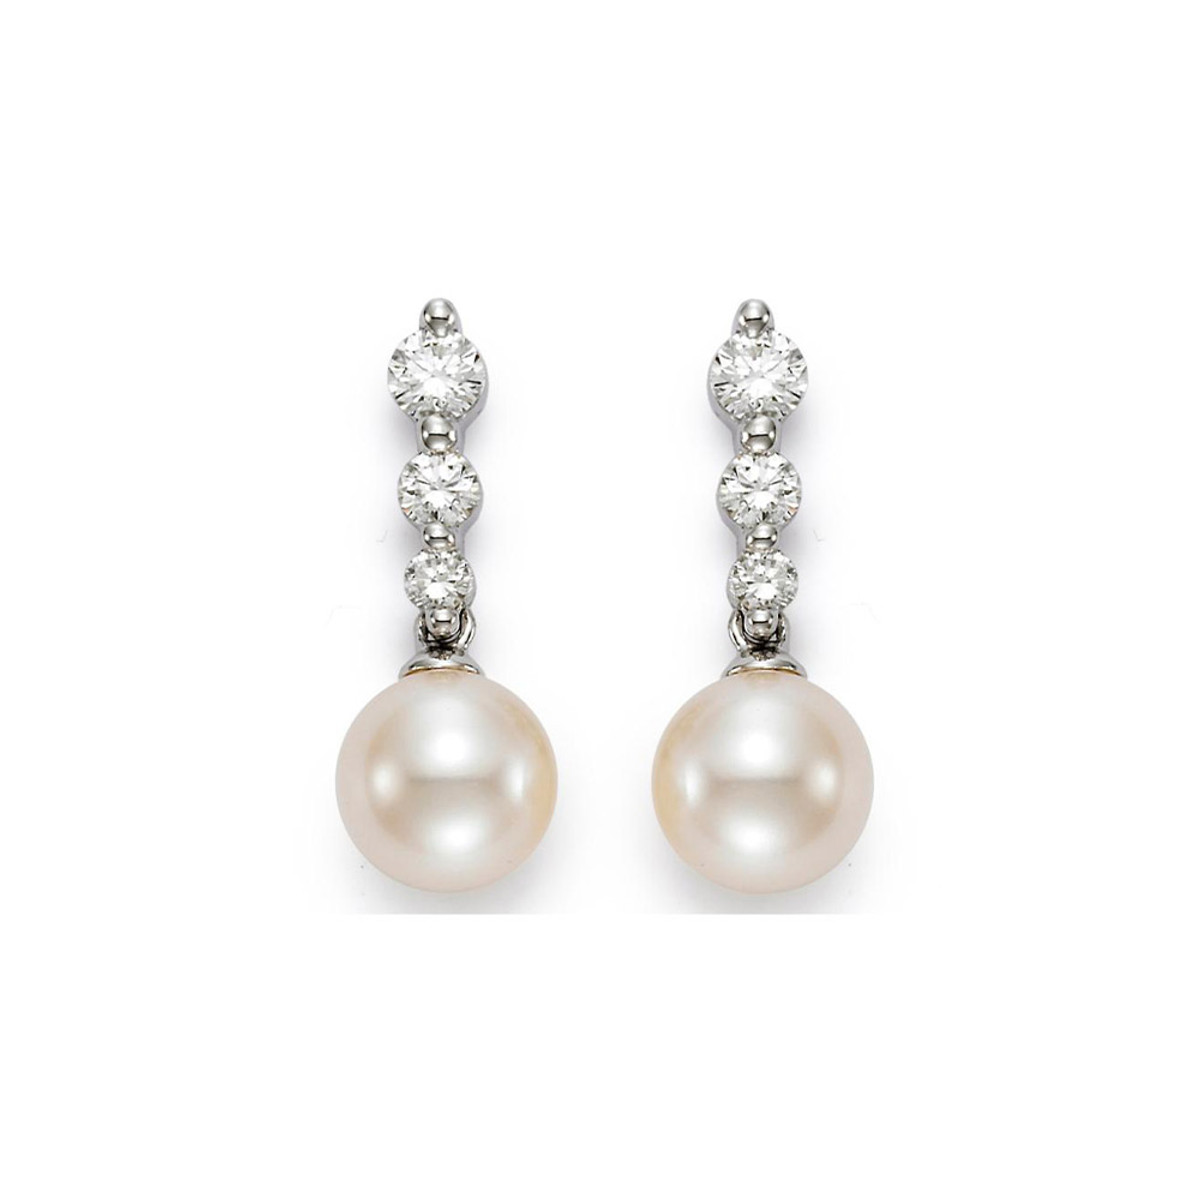 Hyde Park Collection 18K White Gold Pearl and Diamond Earrings-58176